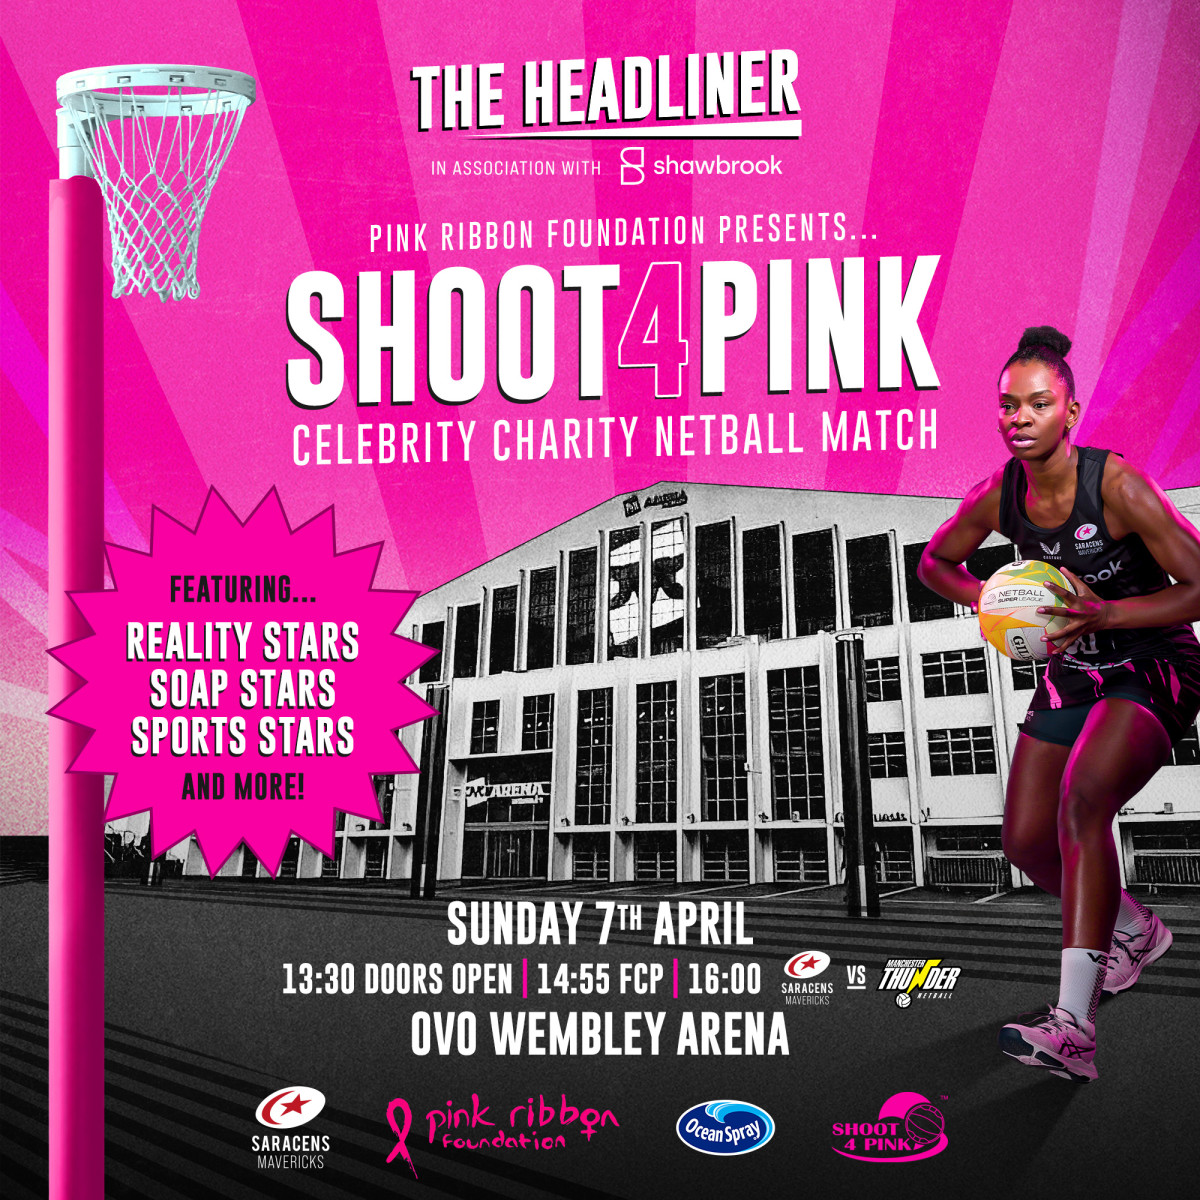 SHOOT4PINK celebrity netball at The Headliner